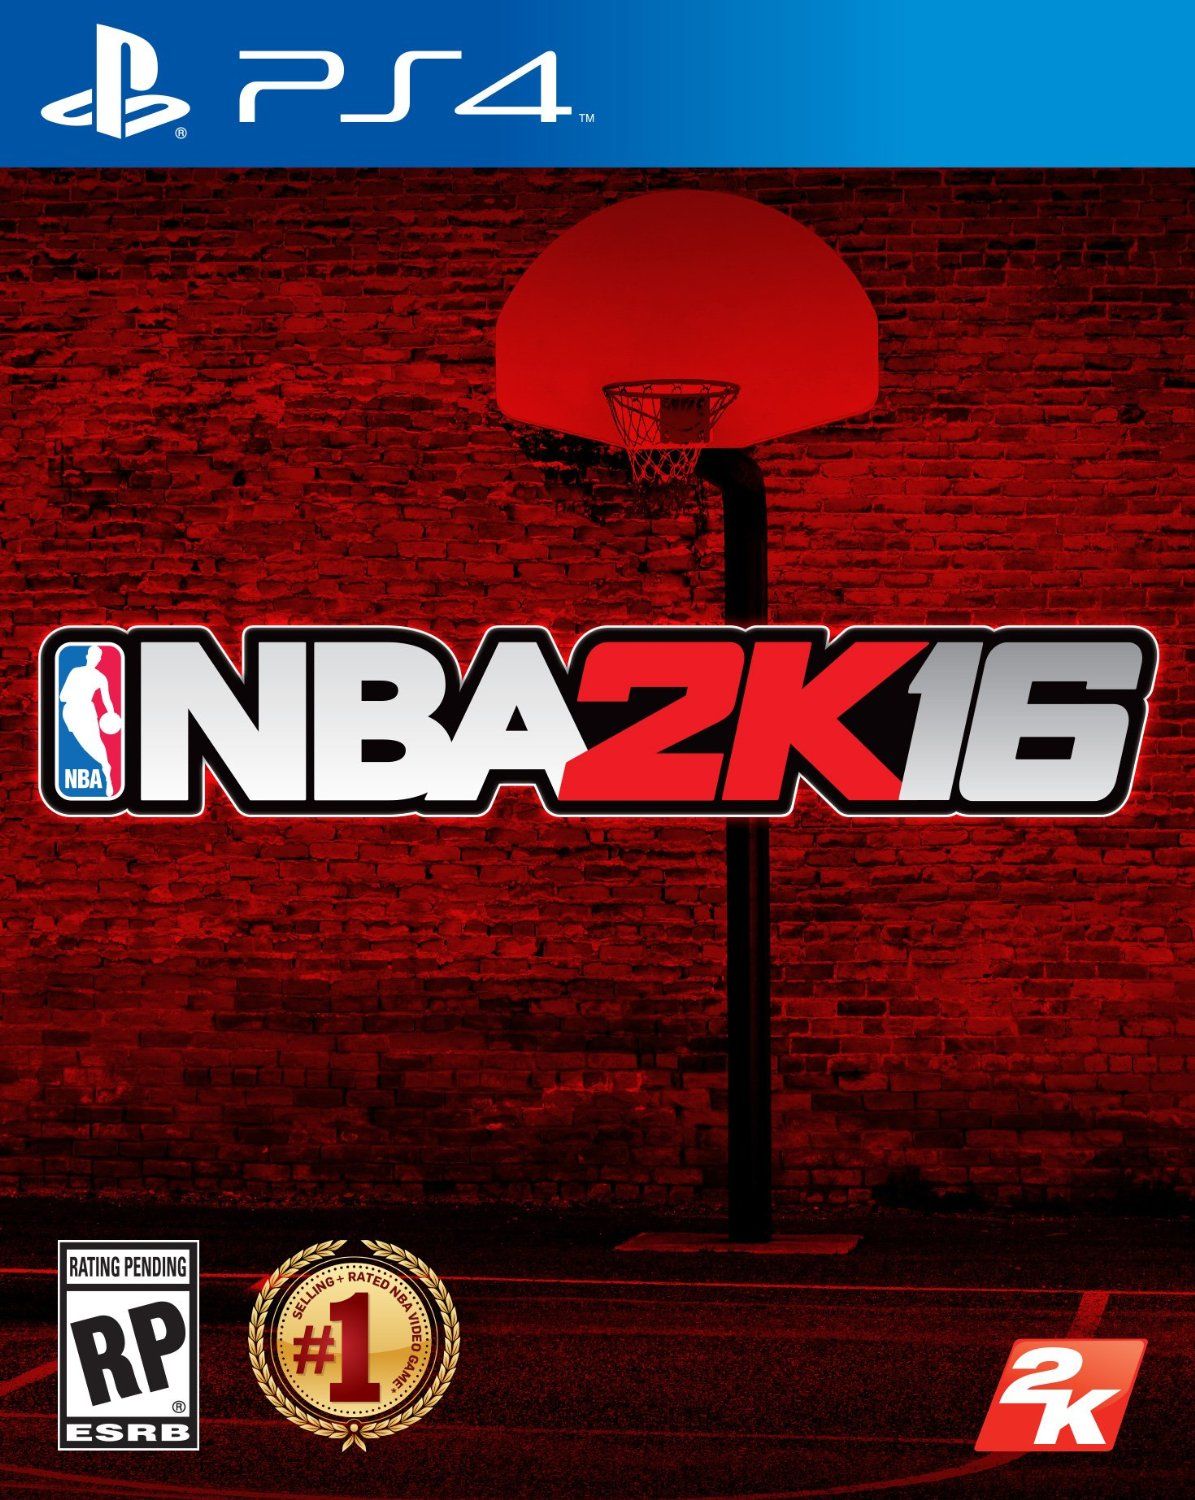 Image for NBA 2K16 digital sales doubled year-over-year, 4M units sold to retail